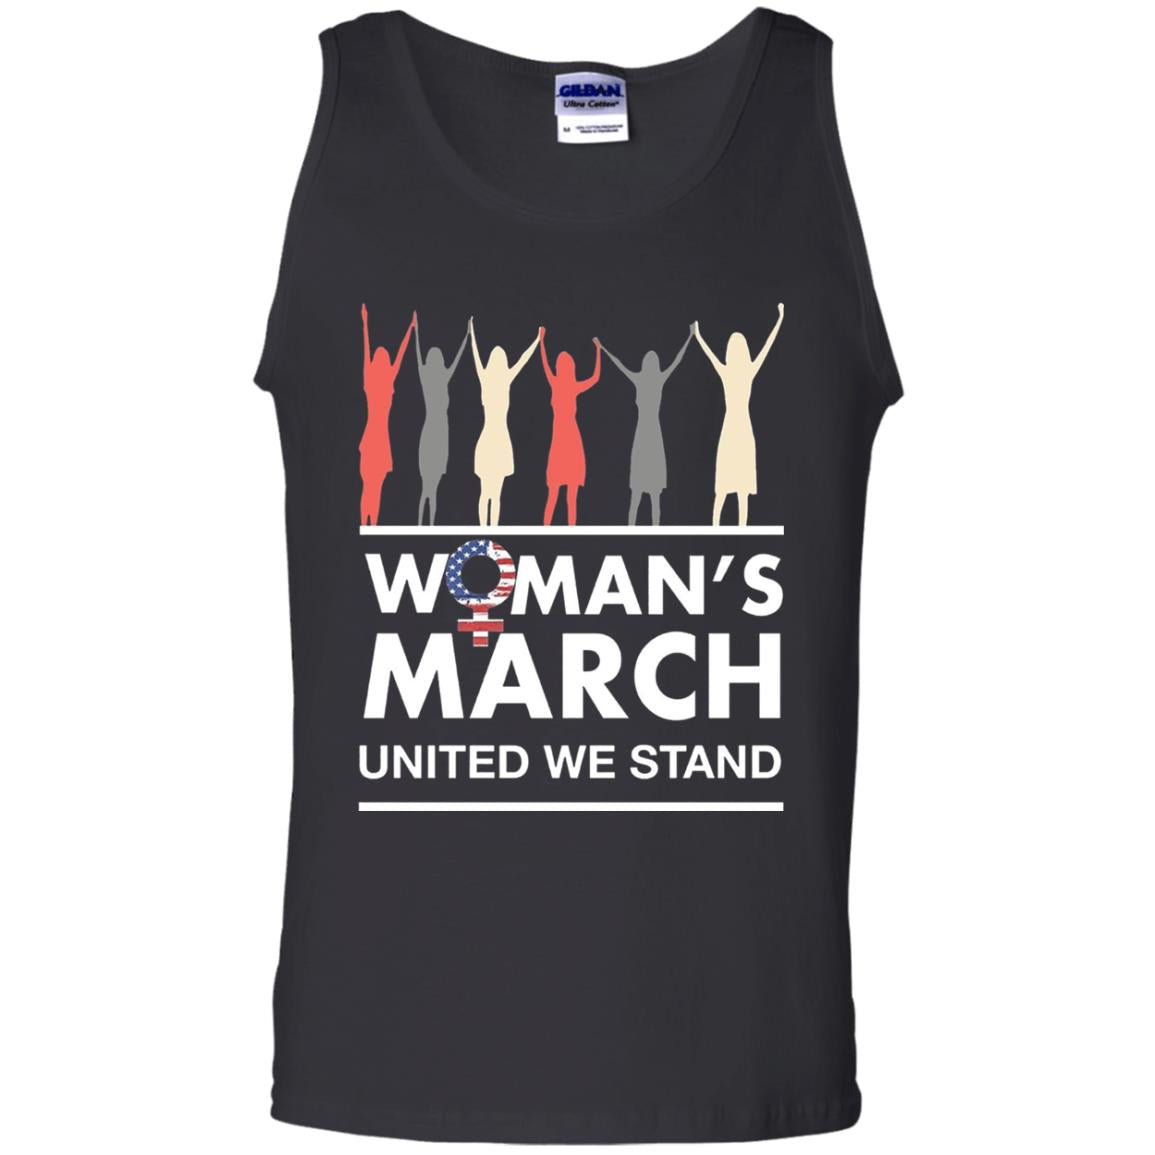 Women_s Right T-shirt Women_s March United We Stand